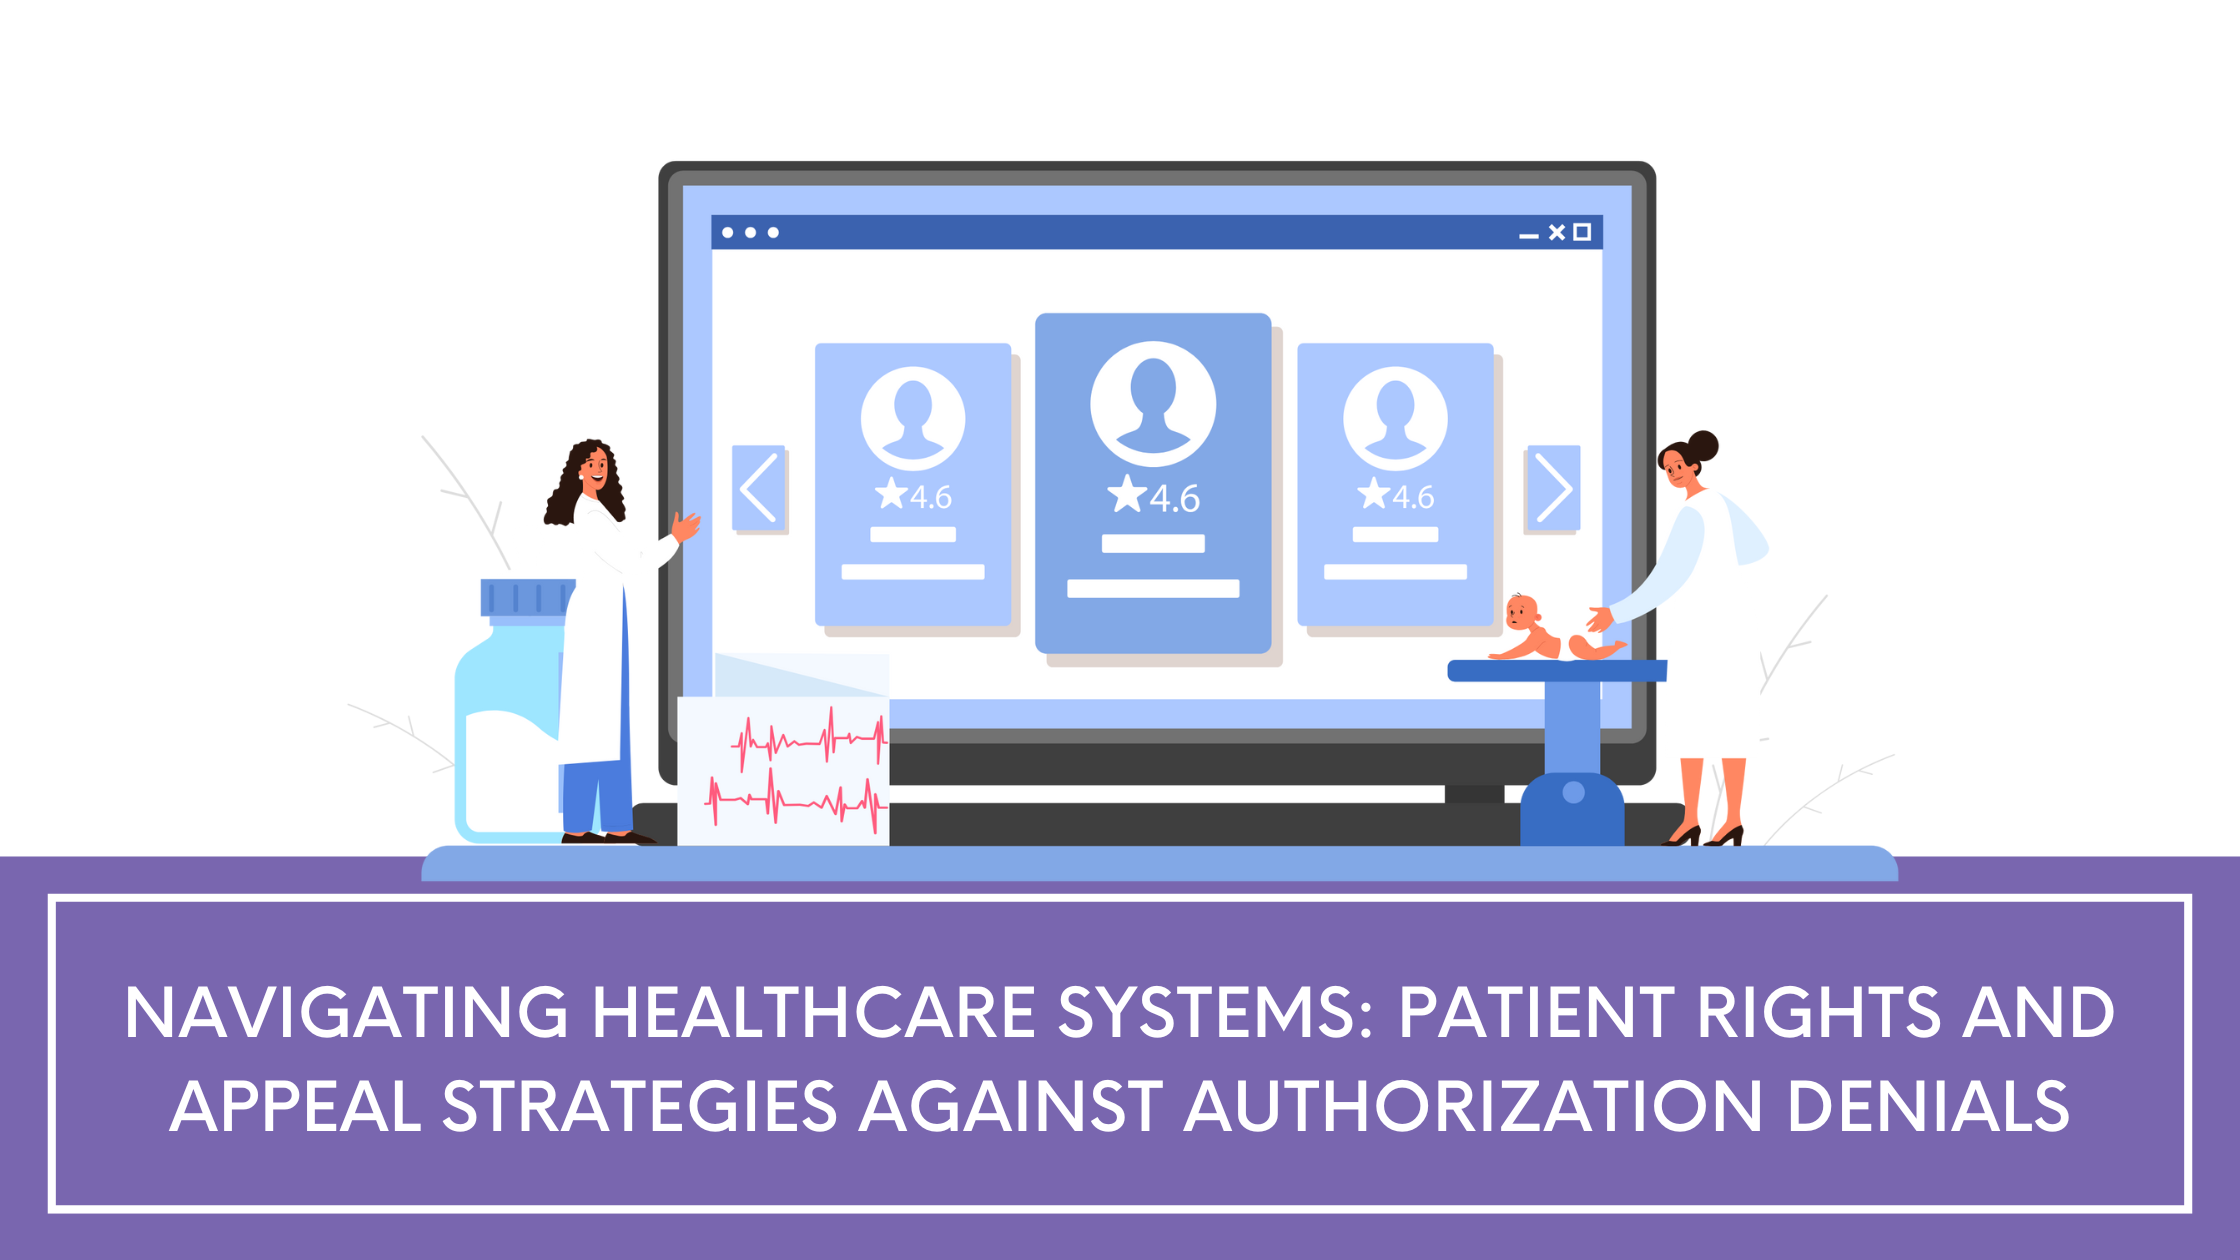 Navigating Healthcare Systems: Patient Rights and Appeal Strategies Against Authorization Denials